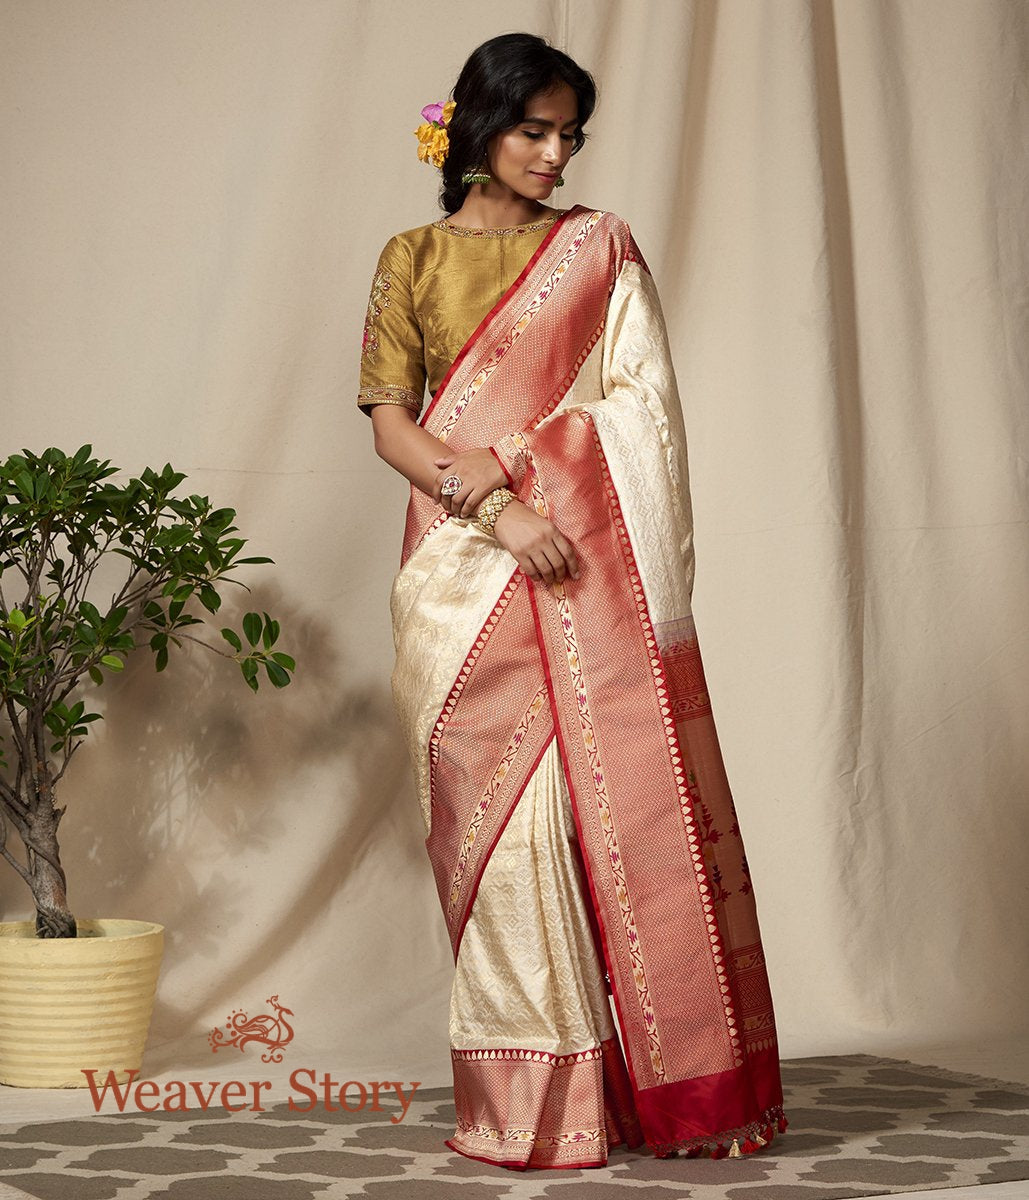 Handloom_OffWhite_and_Gold_Kimkhab_Saree_with_Red_Border_and_Pallu_WeaverStory_02